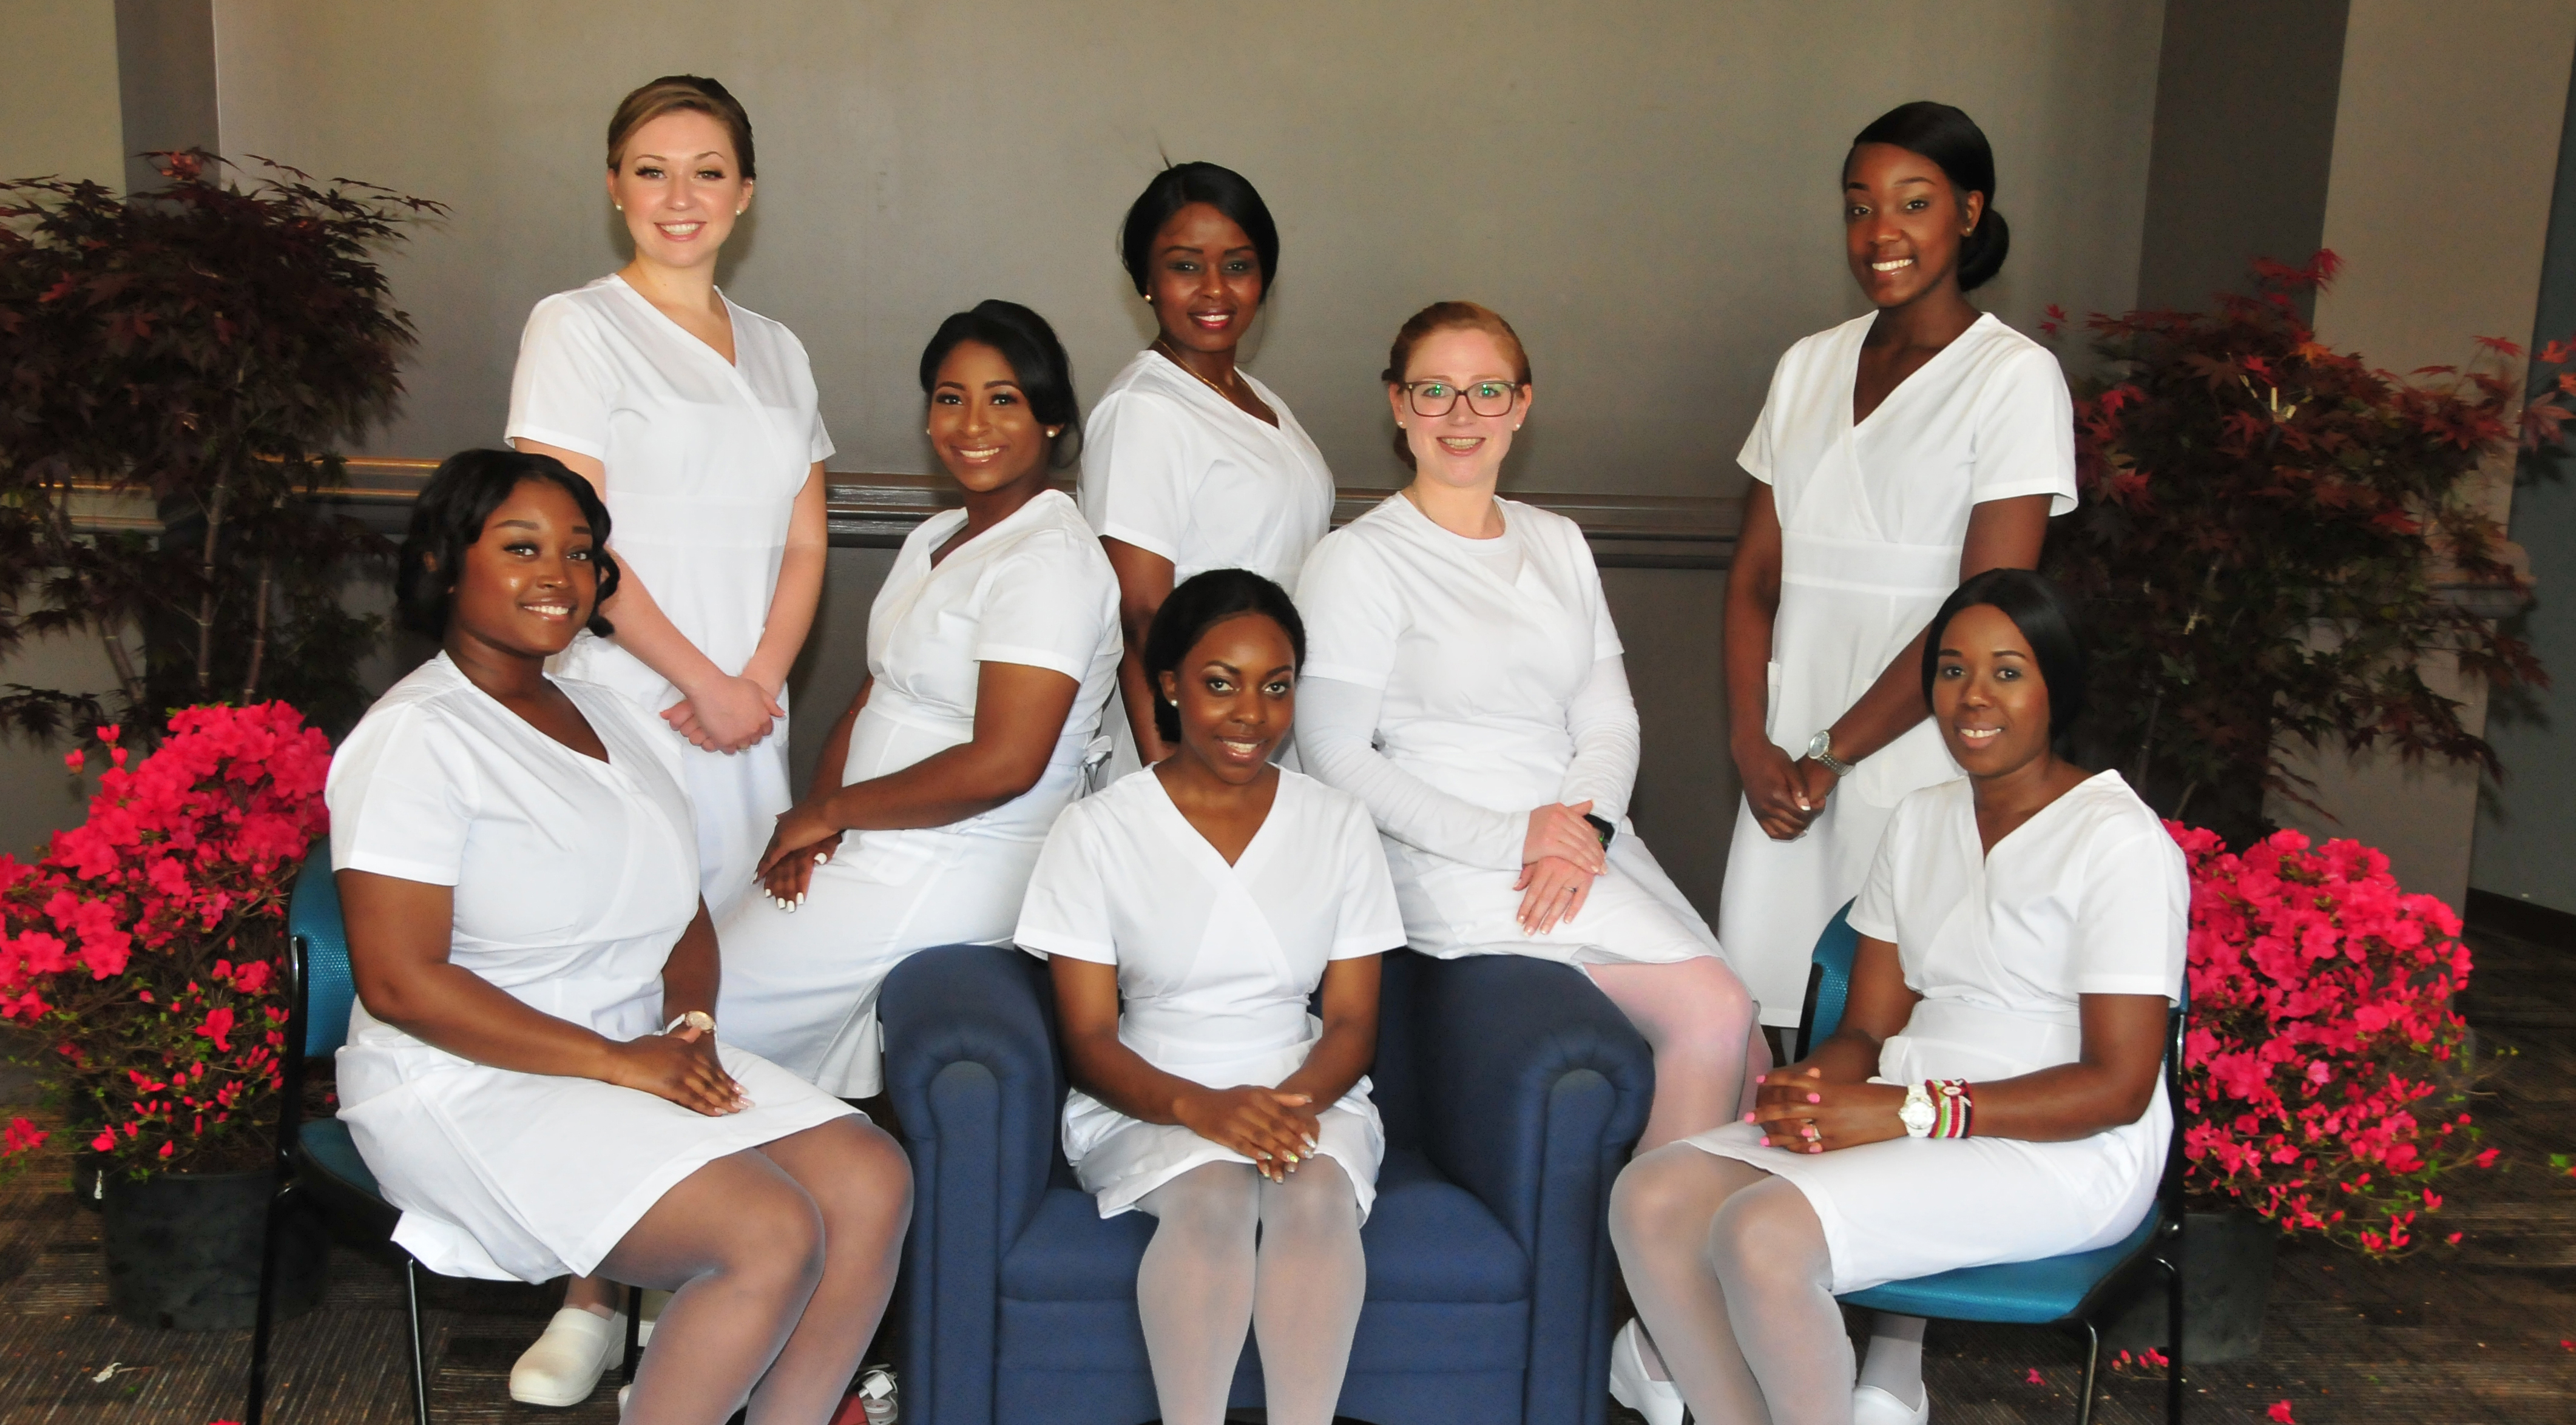 DSU Department of Nursing's Class of 2018: (l-r) Alexis Sudler, Idalis Stamas, Breanna Clinton, Jadidah Gatheri (standing), Emmanuella Che (seated), Katherine Groves, Kayla Nelson and Mary Muthini.